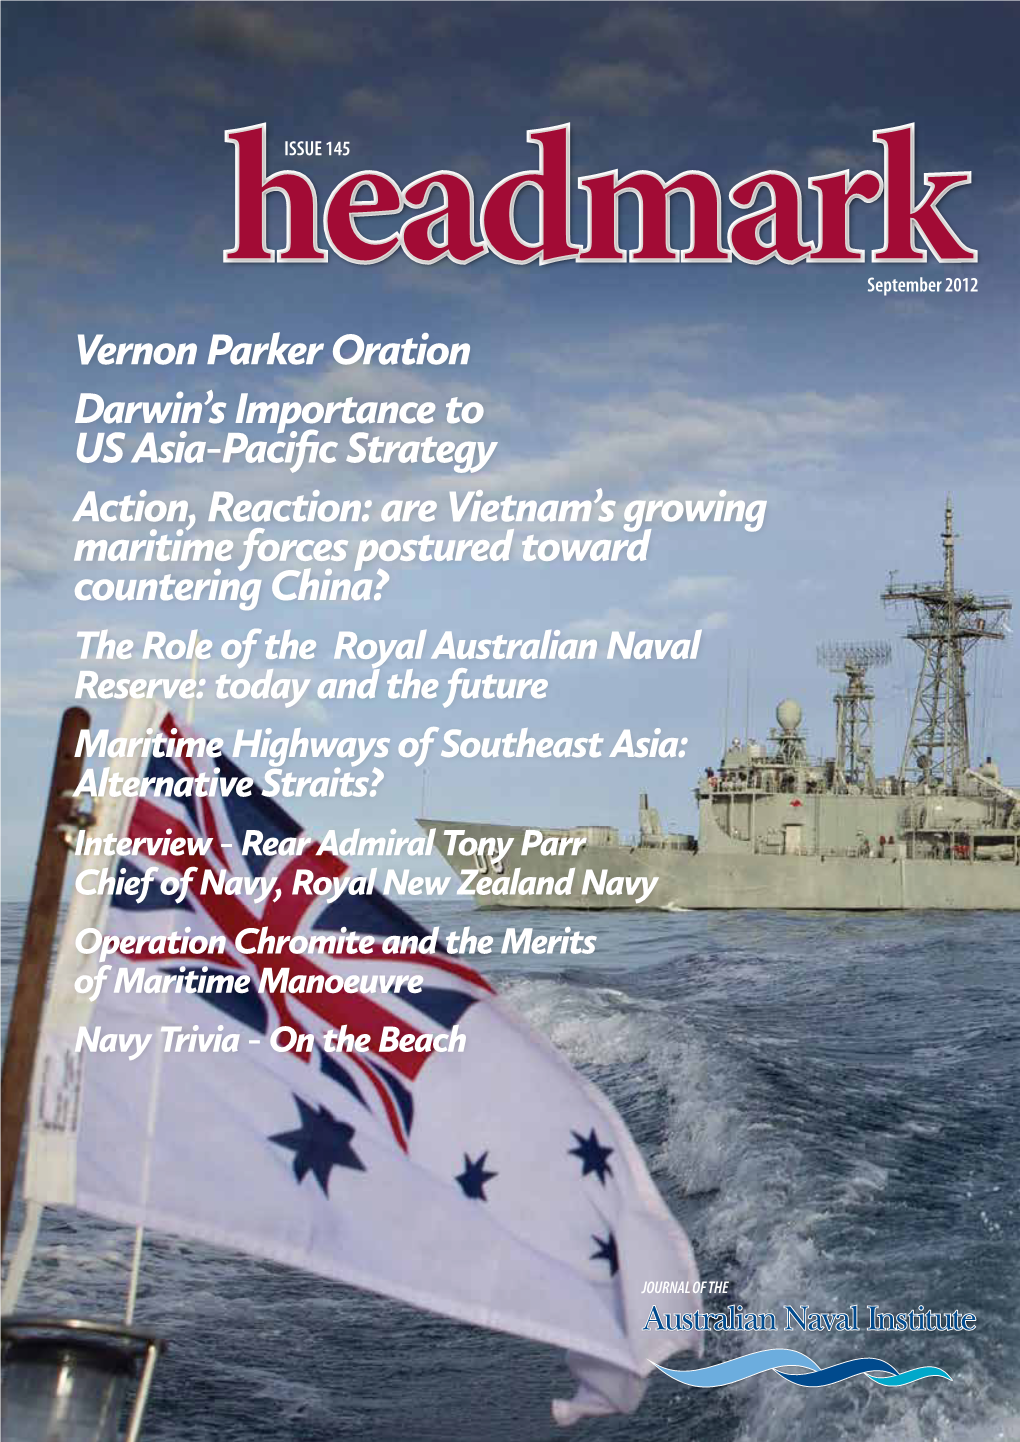 Vernon Parker Oration Darwin's Importance to US Asia-Pacific Strategy Action, Reaction: Are Vietnam's Growing Maritime Force